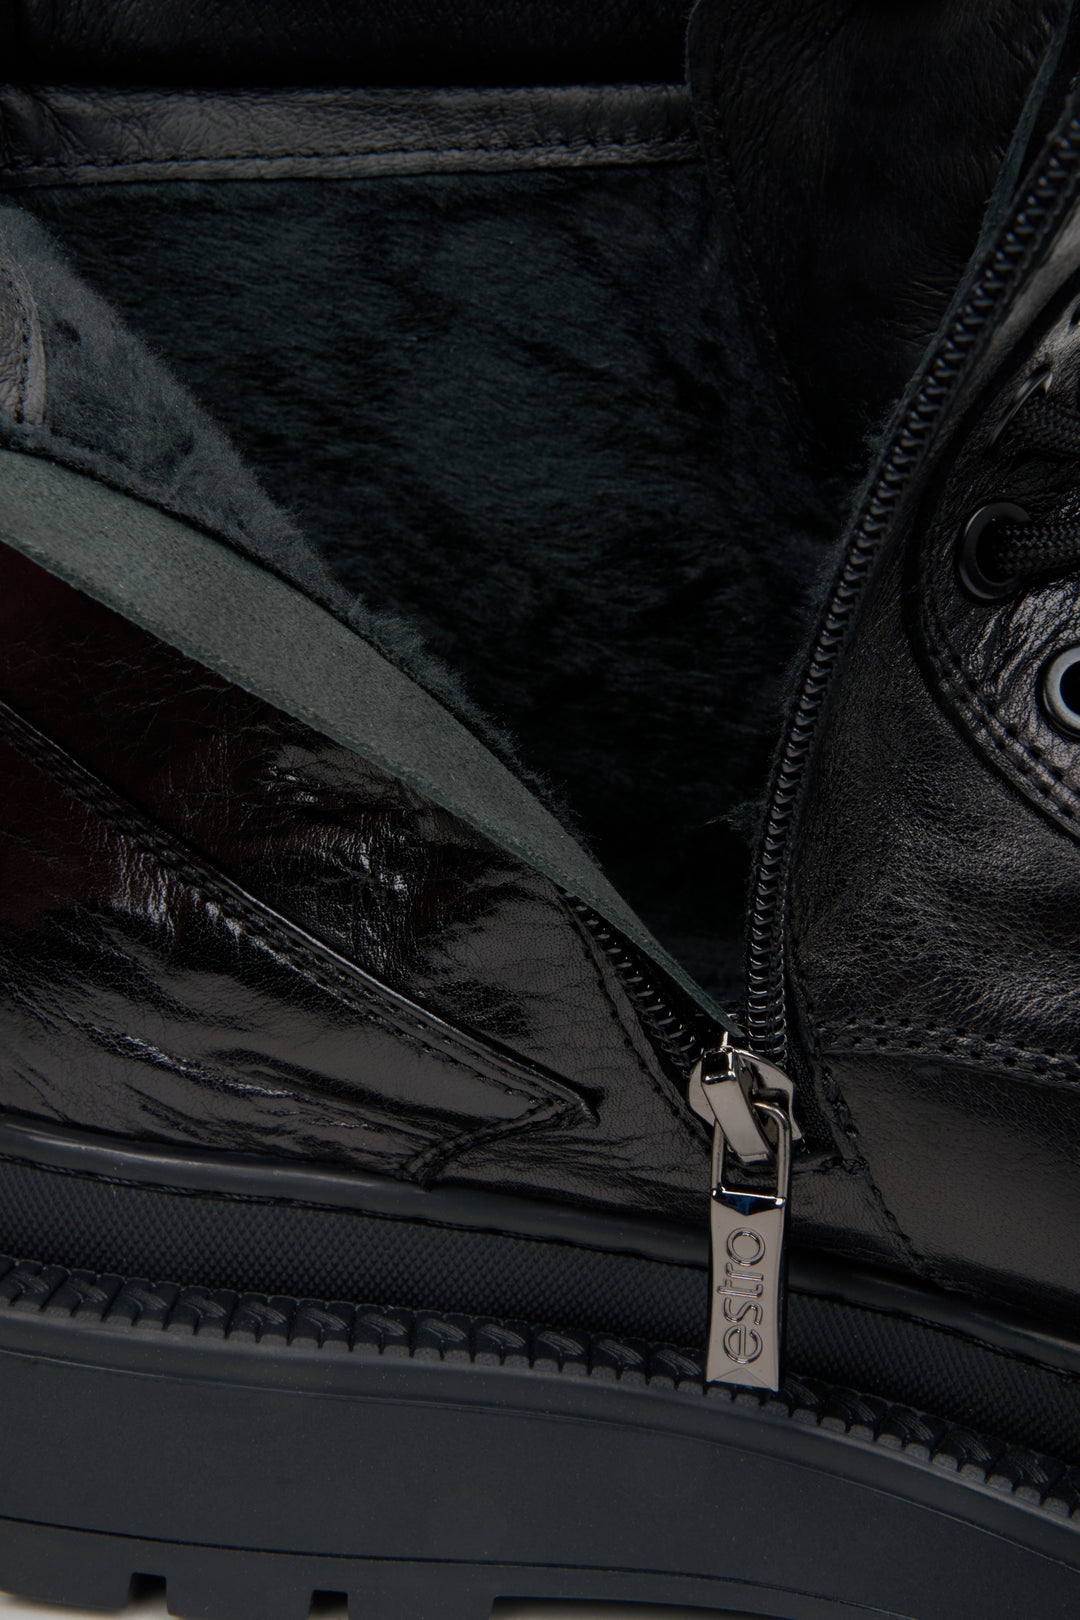 Men's black leather boots by Estro - close-up on the interior.